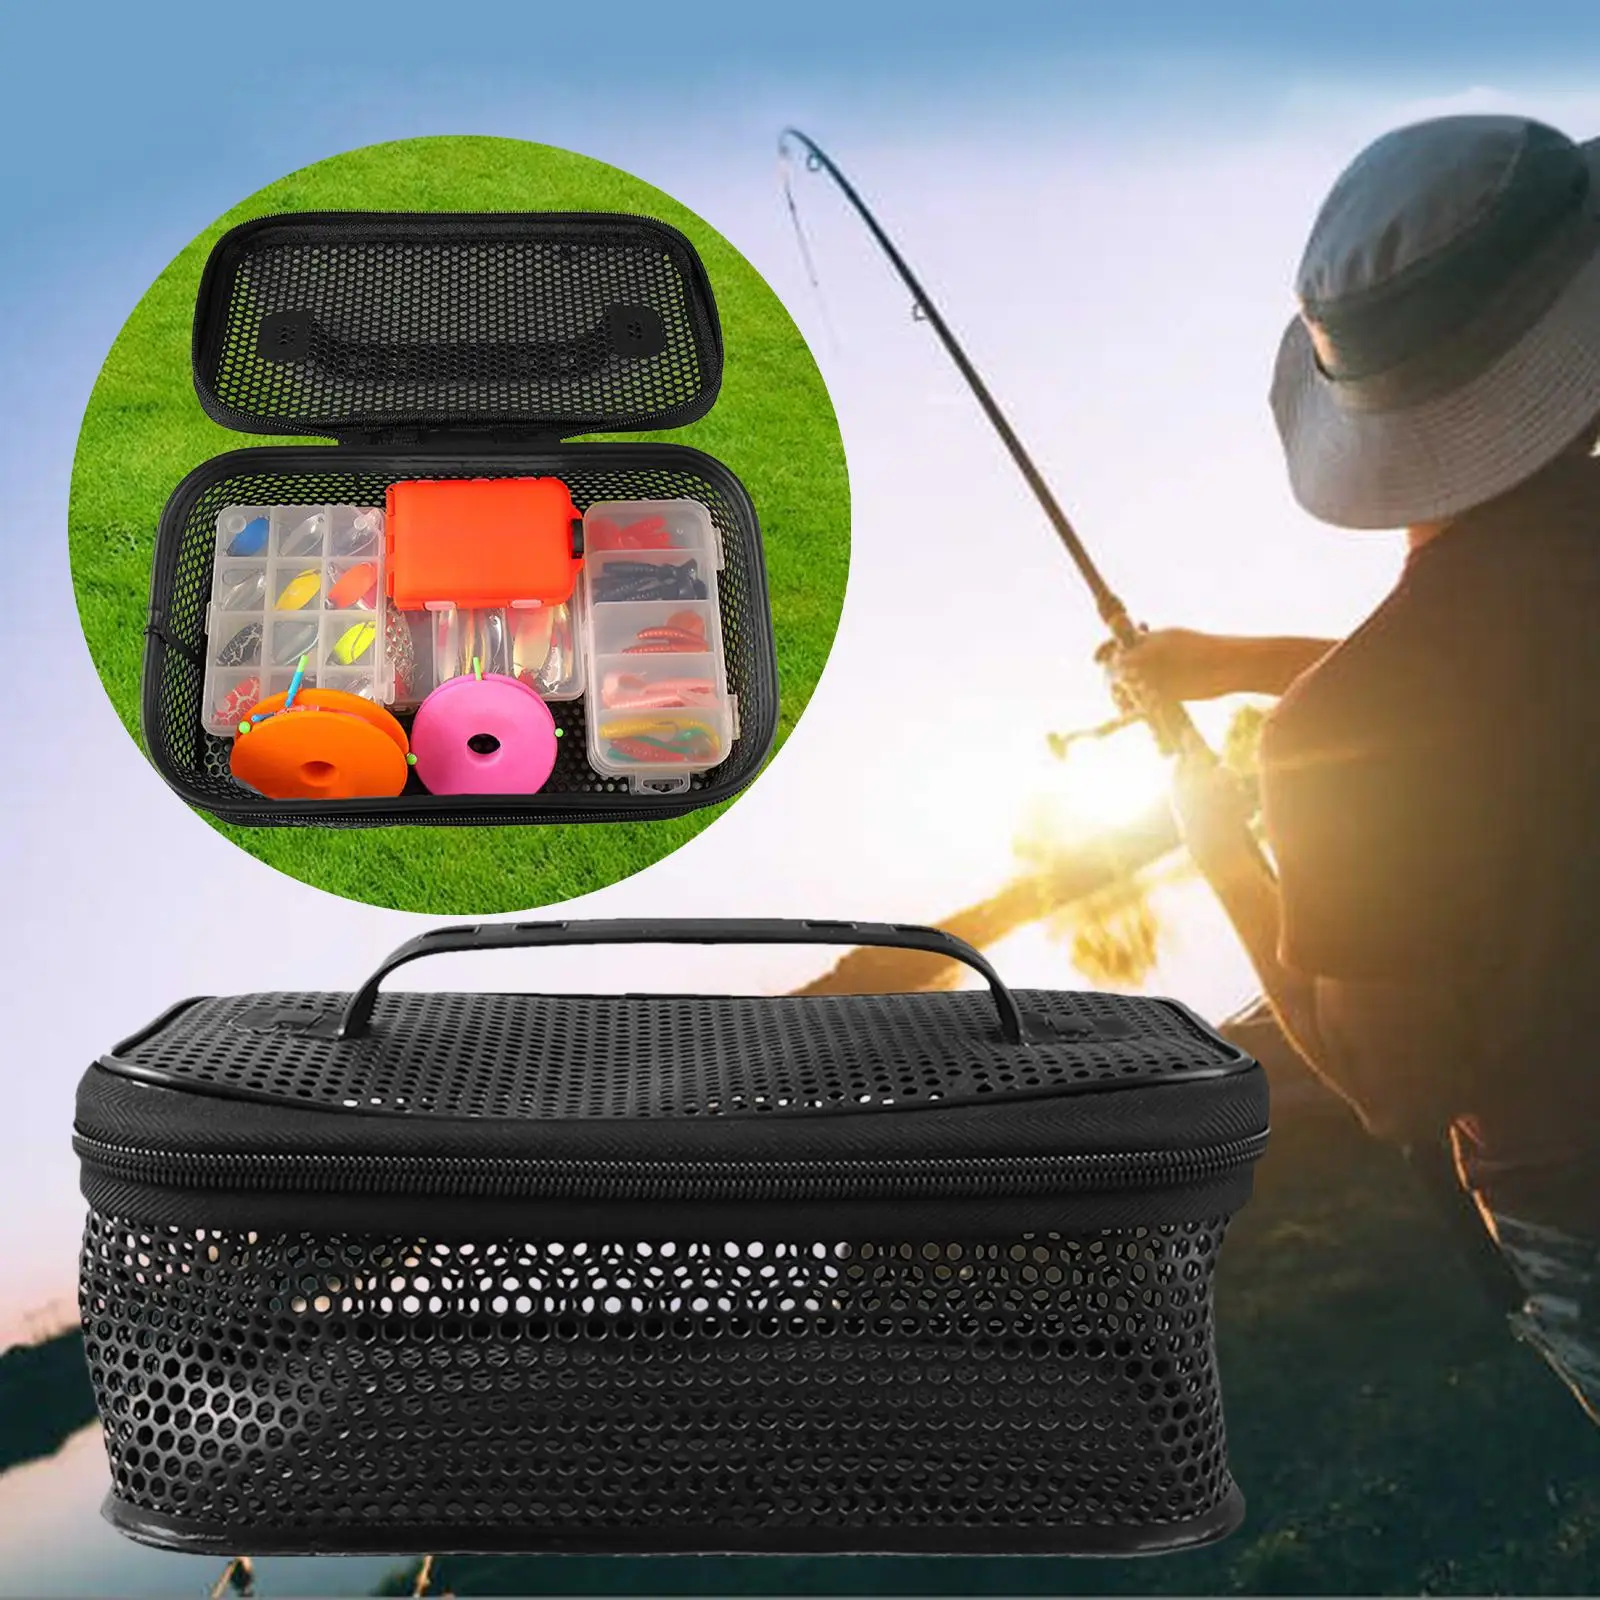 Mesh Lure Jigs Pouch Practical Outdoor Fishing Accessories Durable Wear Resistant Mesh Fishing Bait Handbag Tackle Carry Case